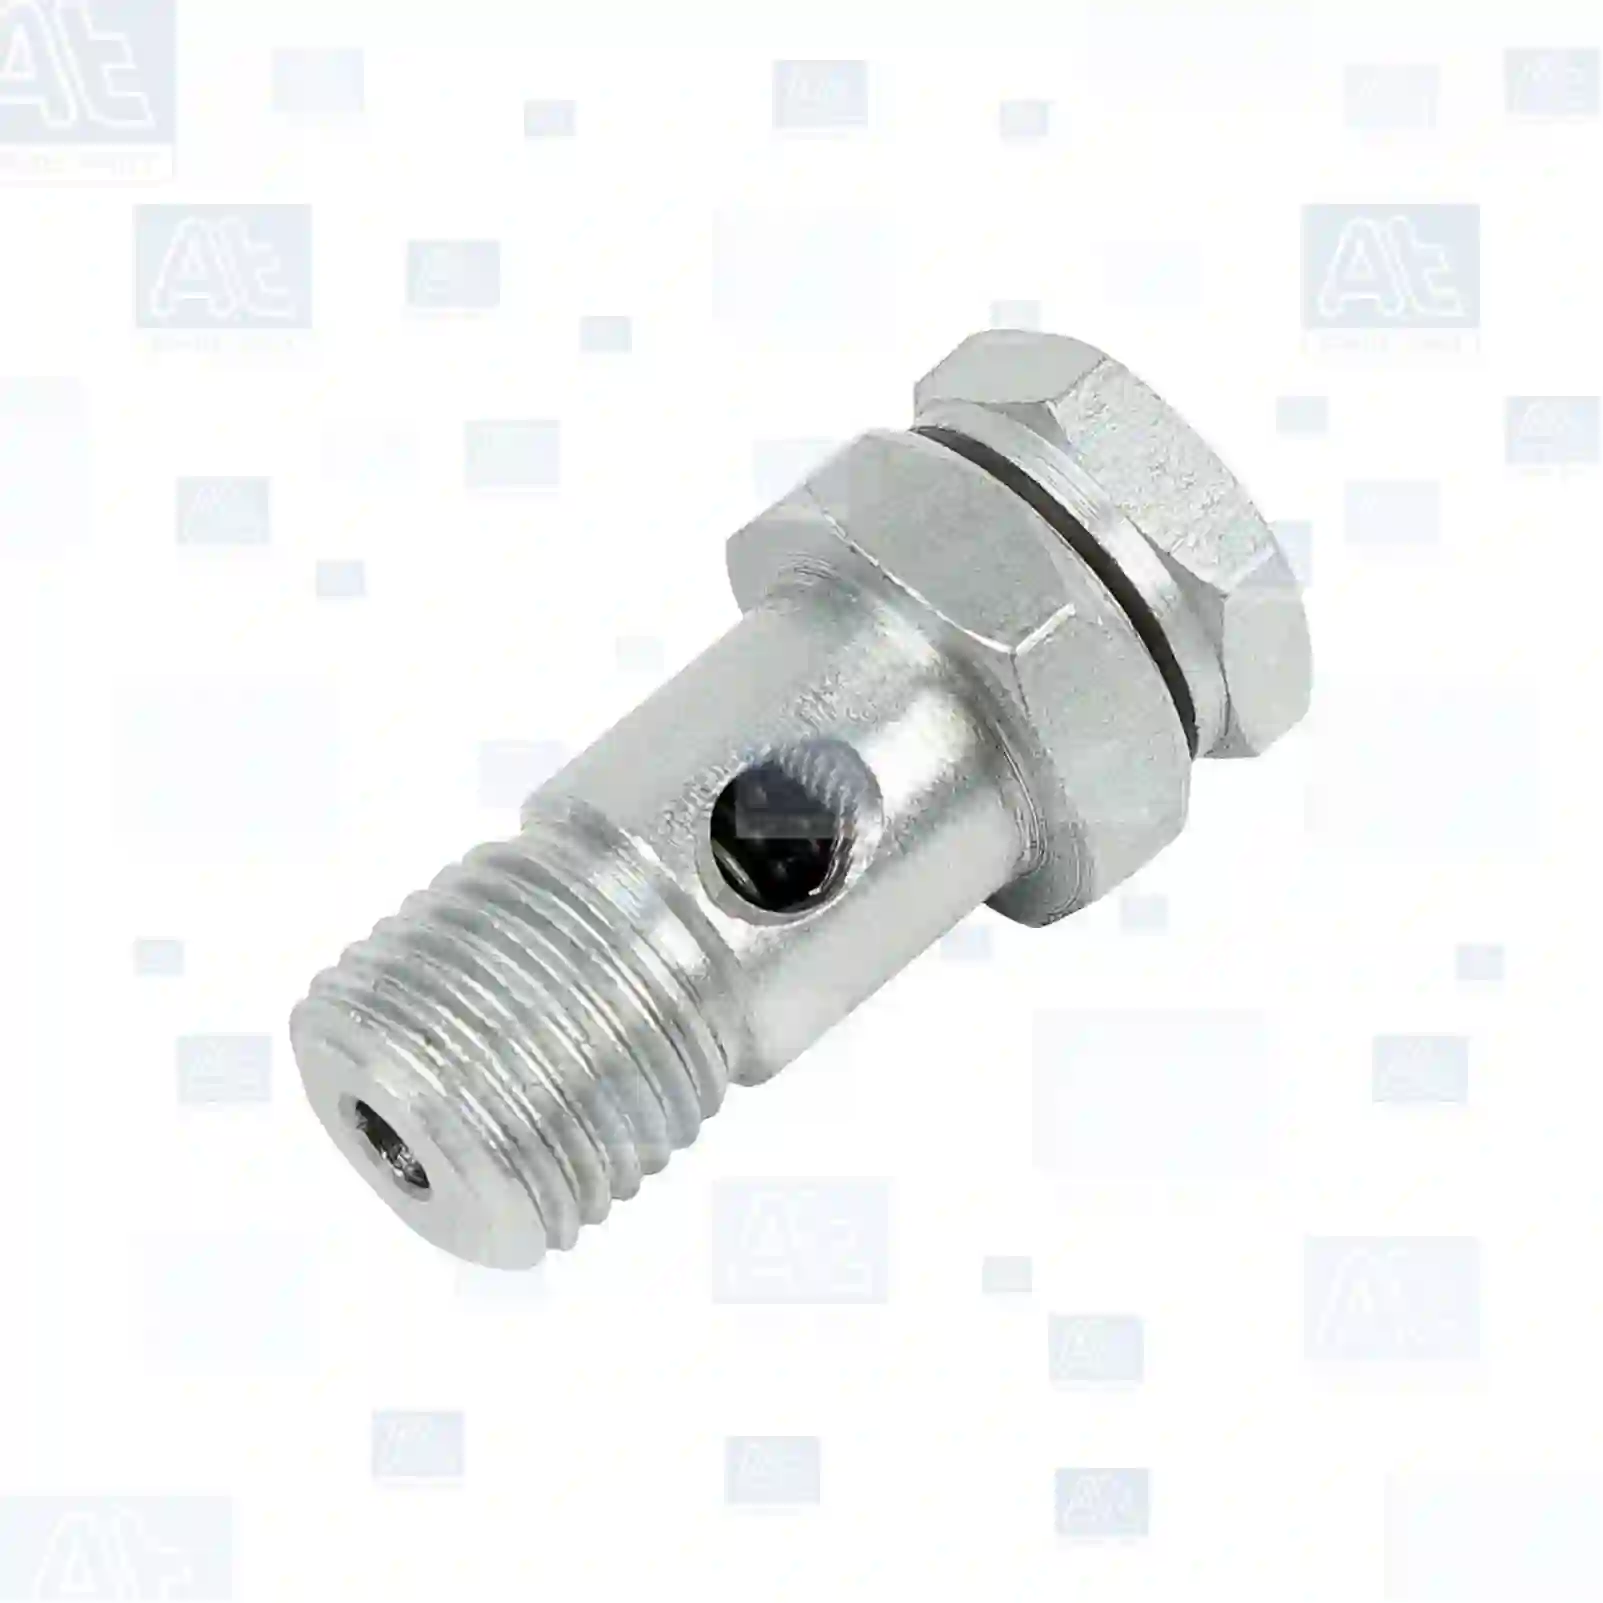 Overflow valve, at no 77723242, oem no: 3017012, 79072618, 84399615, 0245187, 245187, 08190294, 79072618, 0794629, X820310230000, 00758065, 00768324, 07114866, 09947994, 09951032, 09959314, 79046037, 1514662, 1514670, 91107226, 3053011R91, J912886, 00758065, 00768324, 07114866, 09959314, 79046037, 201149024, 03476293, 150172819, 12037792, 12151916, 00758065, 00768324, 07114866, 09959314, 79046037, 11200130003, 51125050004, 81125050001, 81125050010, 85100002659, 85100003593, 90816929683, K0001320562, K0003472182, K0003476293, N1011000360, 0000740515, 304560000012, 604524000002, 604524000012, 606908740213, 79072618, 16860-D8702, OD17670, 0003017012, 7701015744, 7701015744, 7701015744, 238041, 7238041, TN4130653, ZG50546-0008 At Spare Part | Engine, Accelerator Pedal, Camshaft, Connecting Rod, Crankcase, Crankshaft, Cylinder Head, Engine Suspension Mountings, Exhaust Manifold, Exhaust Gas Recirculation, Filter Kits, Flywheel Housing, General Overhaul Kits, Engine, Intake Manifold, Oil Cleaner, Oil Cooler, Oil Filter, Oil Pump, Oil Sump, Piston & Liner, Sensor & Switch, Timing Case, Turbocharger, Cooling System, Belt Tensioner, Coolant Filter, Coolant Pipe, Corrosion Prevention Agent, Drive, Expansion Tank, Fan, Intercooler, Monitors & Gauges, Radiator, Thermostat, V-Belt / Timing belt, Water Pump, Fuel System, Electronical Injector Unit, Feed Pump, Fuel Filter, cpl., Fuel Gauge Sender,  Fuel Line, Fuel Pump, Fuel Tank, Injection Line Kit, Injection Pump, Exhaust System, Clutch & Pedal, Gearbox, Propeller Shaft, Axles, Brake System, Hubs & Wheels, Suspension, Leaf Spring, Universal Parts / Accessories, Steering, Electrical System, Cabin Overflow valve, at no 77723242, oem no: 3017012, 79072618, 84399615, 0245187, 245187, 08190294, 79072618, 0794629, X820310230000, 00758065, 00768324, 07114866, 09947994, 09951032, 09959314, 79046037, 1514662, 1514670, 91107226, 3053011R91, J912886, 00758065, 00768324, 07114866, 09959314, 79046037, 201149024, 03476293, 150172819, 12037792, 12151916, 00758065, 00768324, 07114866, 09959314, 79046037, 11200130003, 51125050004, 81125050001, 81125050010, 85100002659, 85100003593, 90816929683, K0001320562, K0003472182, K0003476293, N1011000360, 0000740515, 304560000012, 604524000002, 604524000012, 606908740213, 79072618, 16860-D8702, OD17670, 0003017012, 7701015744, 7701015744, 7701015744, 238041, 7238041, TN4130653, ZG50546-0008 At Spare Part | Engine, Accelerator Pedal, Camshaft, Connecting Rod, Crankcase, Crankshaft, Cylinder Head, Engine Suspension Mountings, Exhaust Manifold, Exhaust Gas Recirculation, Filter Kits, Flywheel Housing, General Overhaul Kits, Engine, Intake Manifold, Oil Cleaner, Oil Cooler, Oil Filter, Oil Pump, Oil Sump, Piston & Liner, Sensor & Switch, Timing Case, Turbocharger, Cooling System, Belt Tensioner, Coolant Filter, Coolant Pipe, Corrosion Prevention Agent, Drive, Expansion Tank, Fan, Intercooler, Monitors & Gauges, Radiator, Thermostat, V-Belt / Timing belt, Water Pump, Fuel System, Electronical Injector Unit, Feed Pump, Fuel Filter, cpl., Fuel Gauge Sender,  Fuel Line, Fuel Pump, Fuel Tank, Injection Line Kit, Injection Pump, Exhaust System, Clutch & Pedal, Gearbox, Propeller Shaft, Axles, Brake System, Hubs & Wheels, Suspension, Leaf Spring, Universal Parts / Accessories, Steering, Electrical System, Cabin